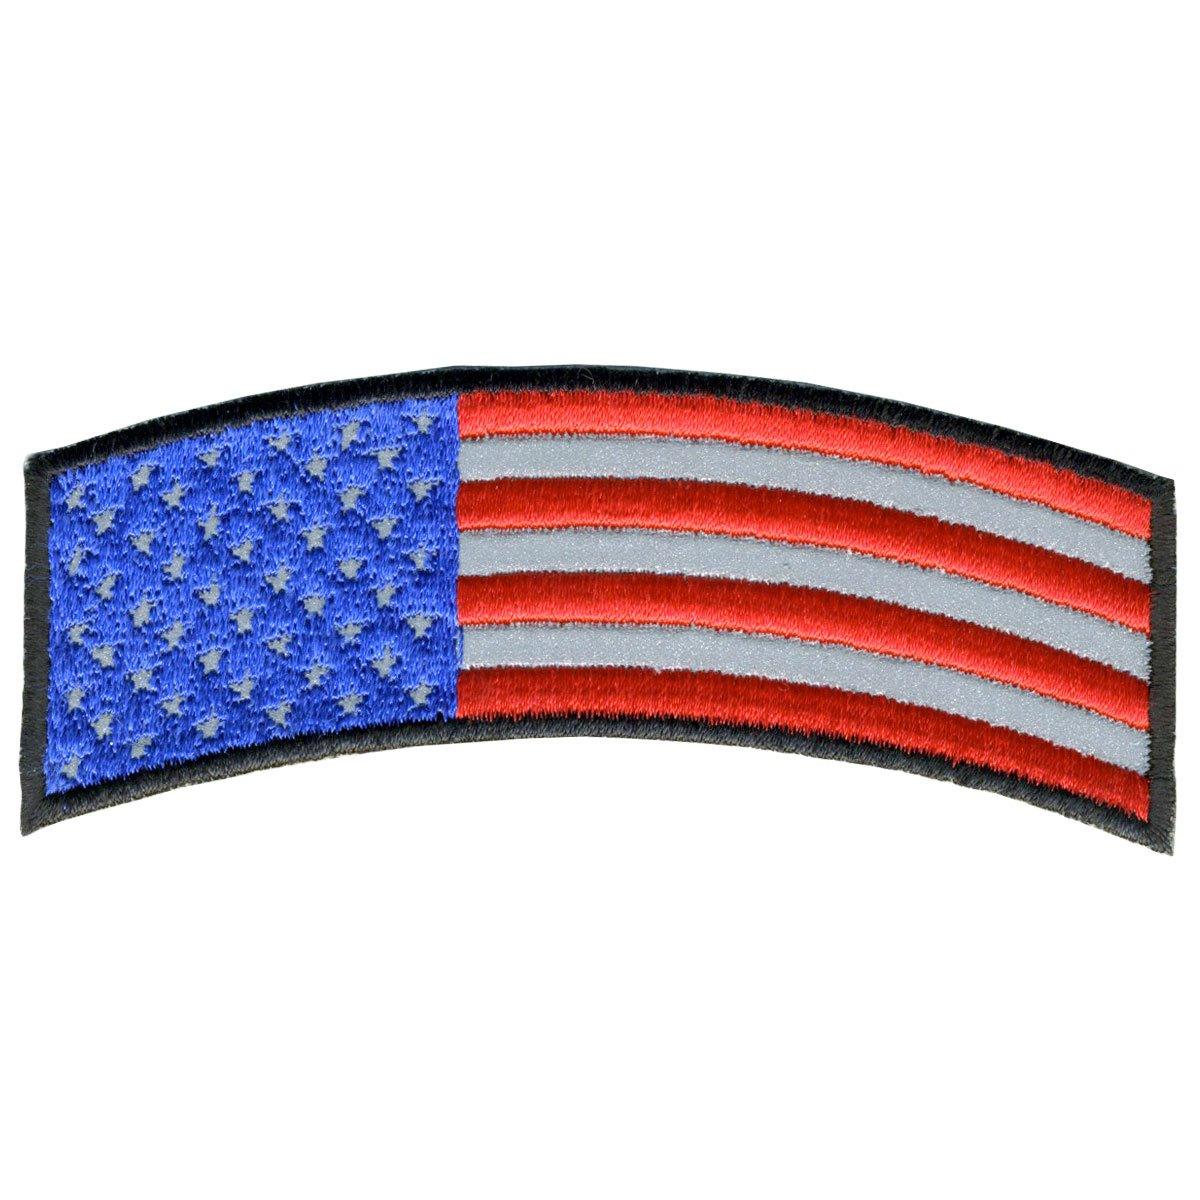 Hot Leathers Reflective American Flag - American Legend Rider